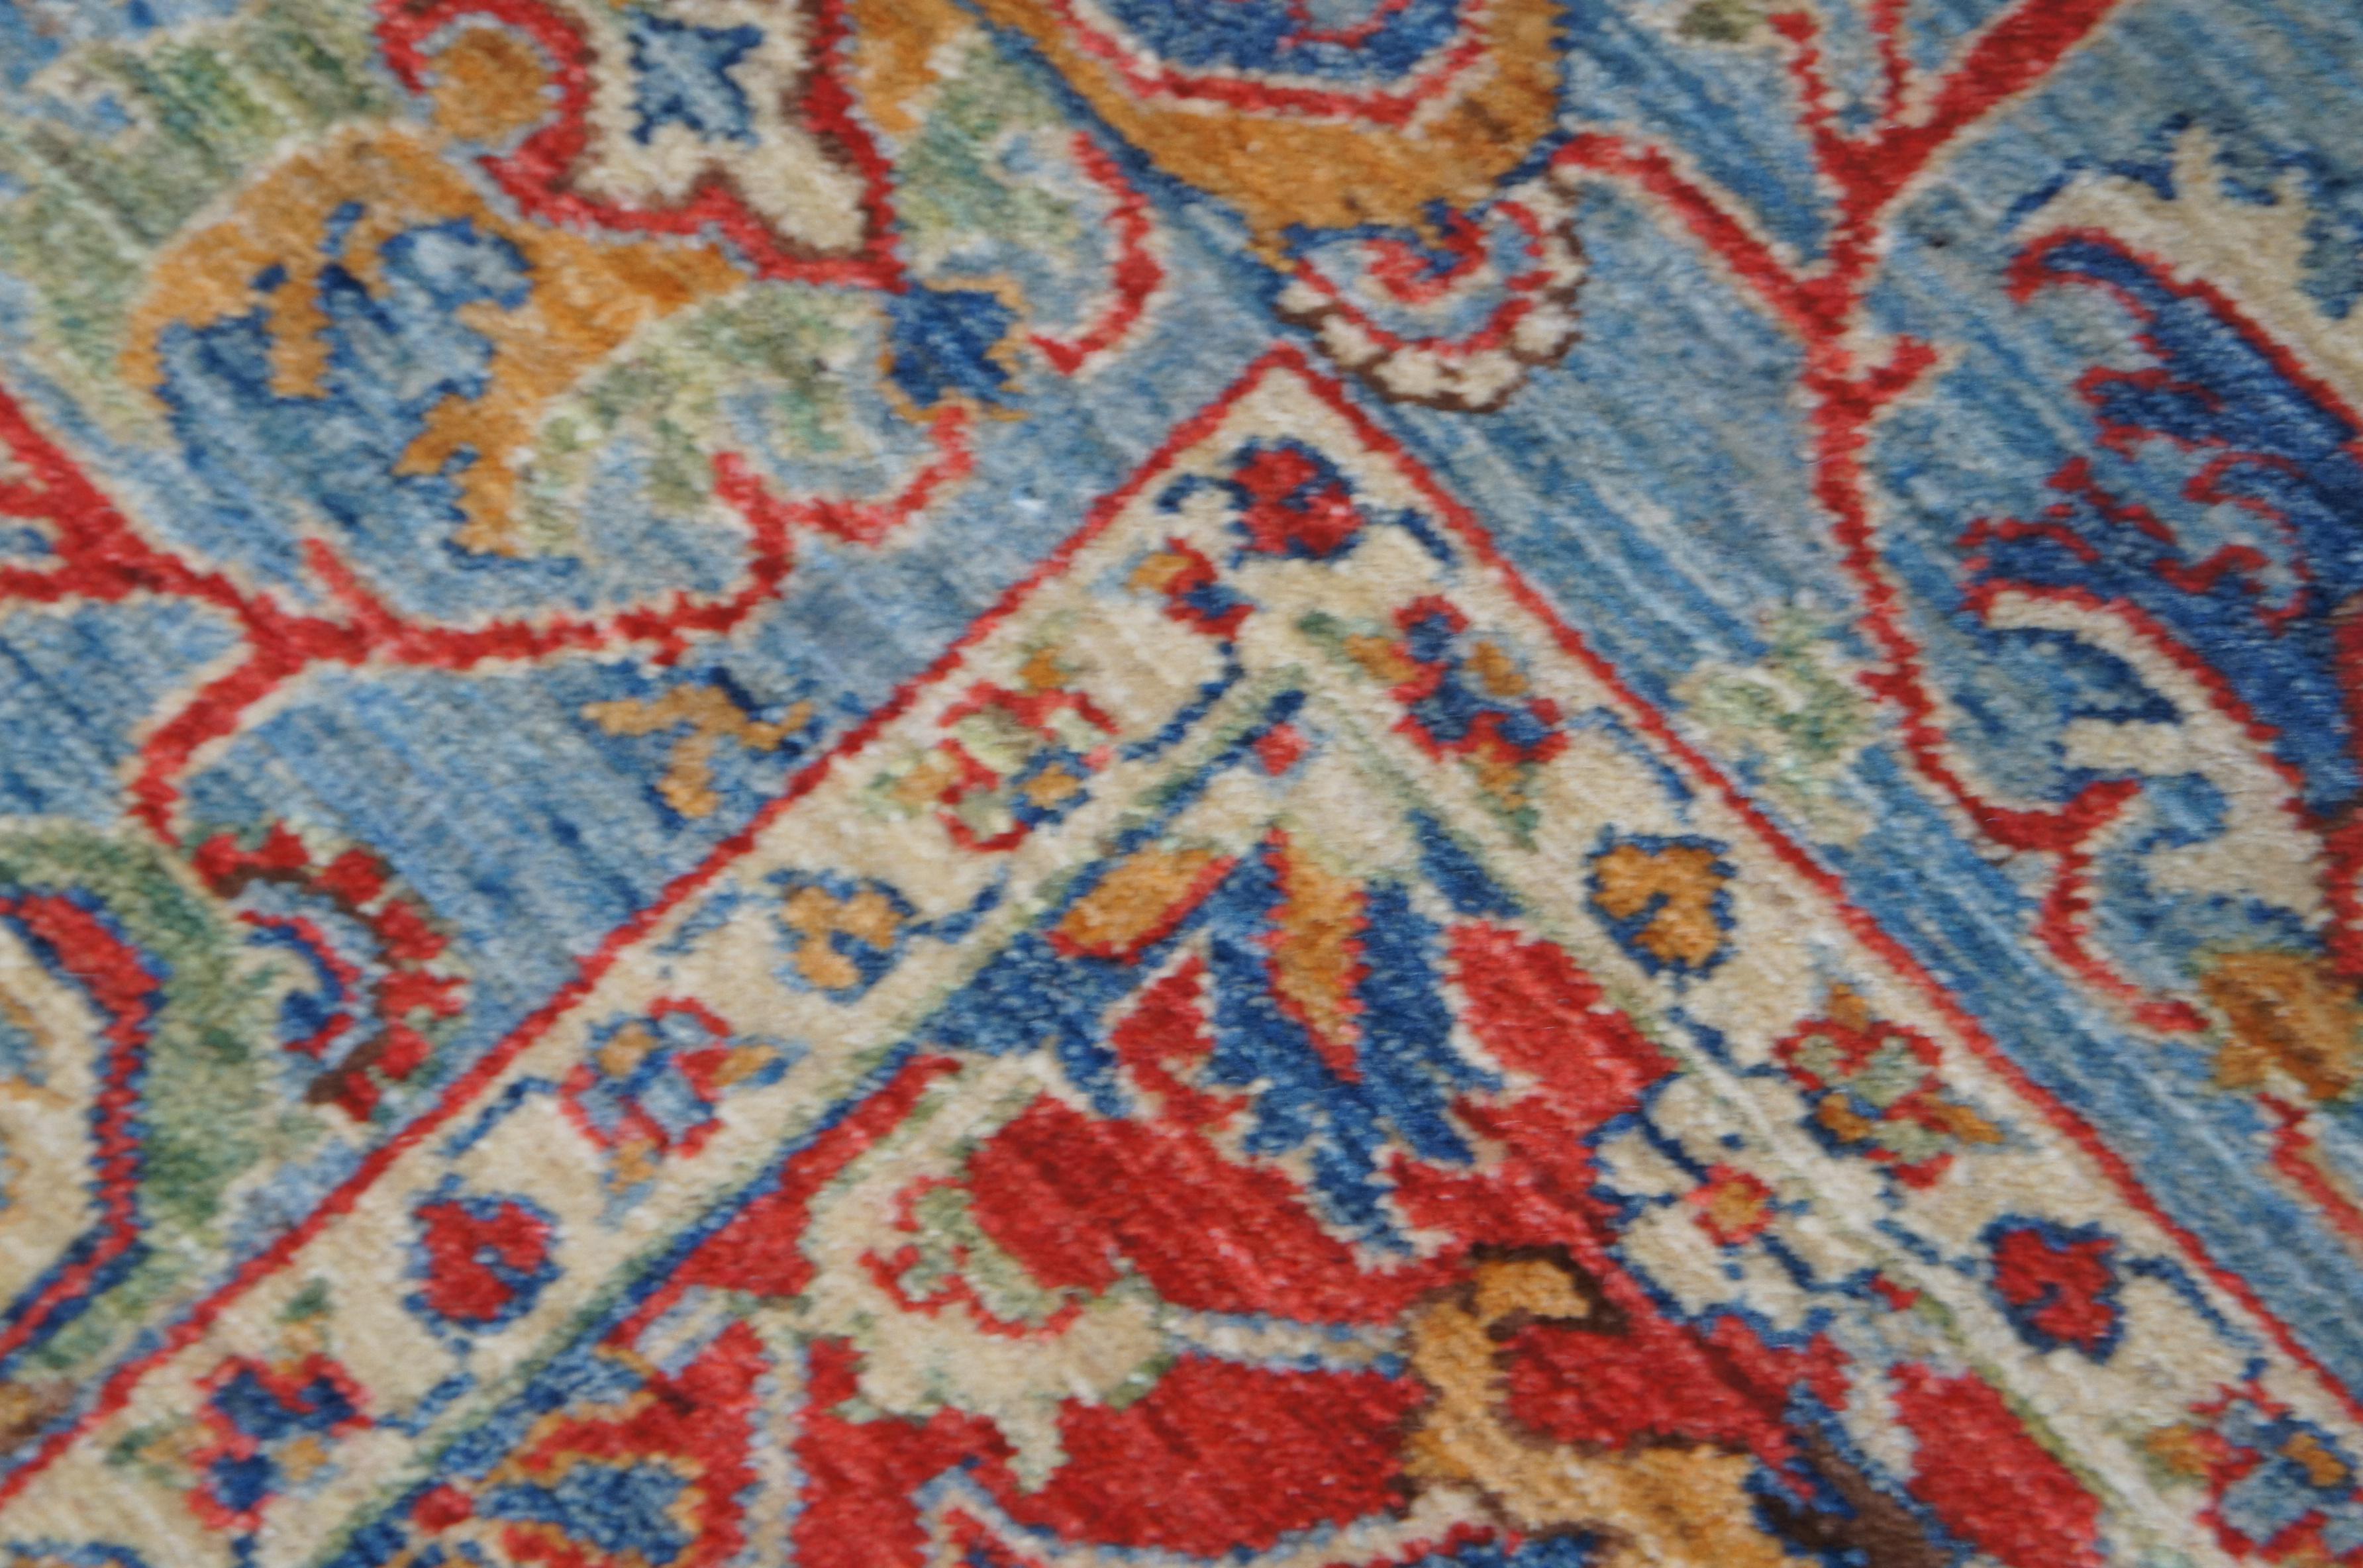 Islamic Traditional Pakistan Hand Knotted Wool Floral Area Rug Carpet Red Blue